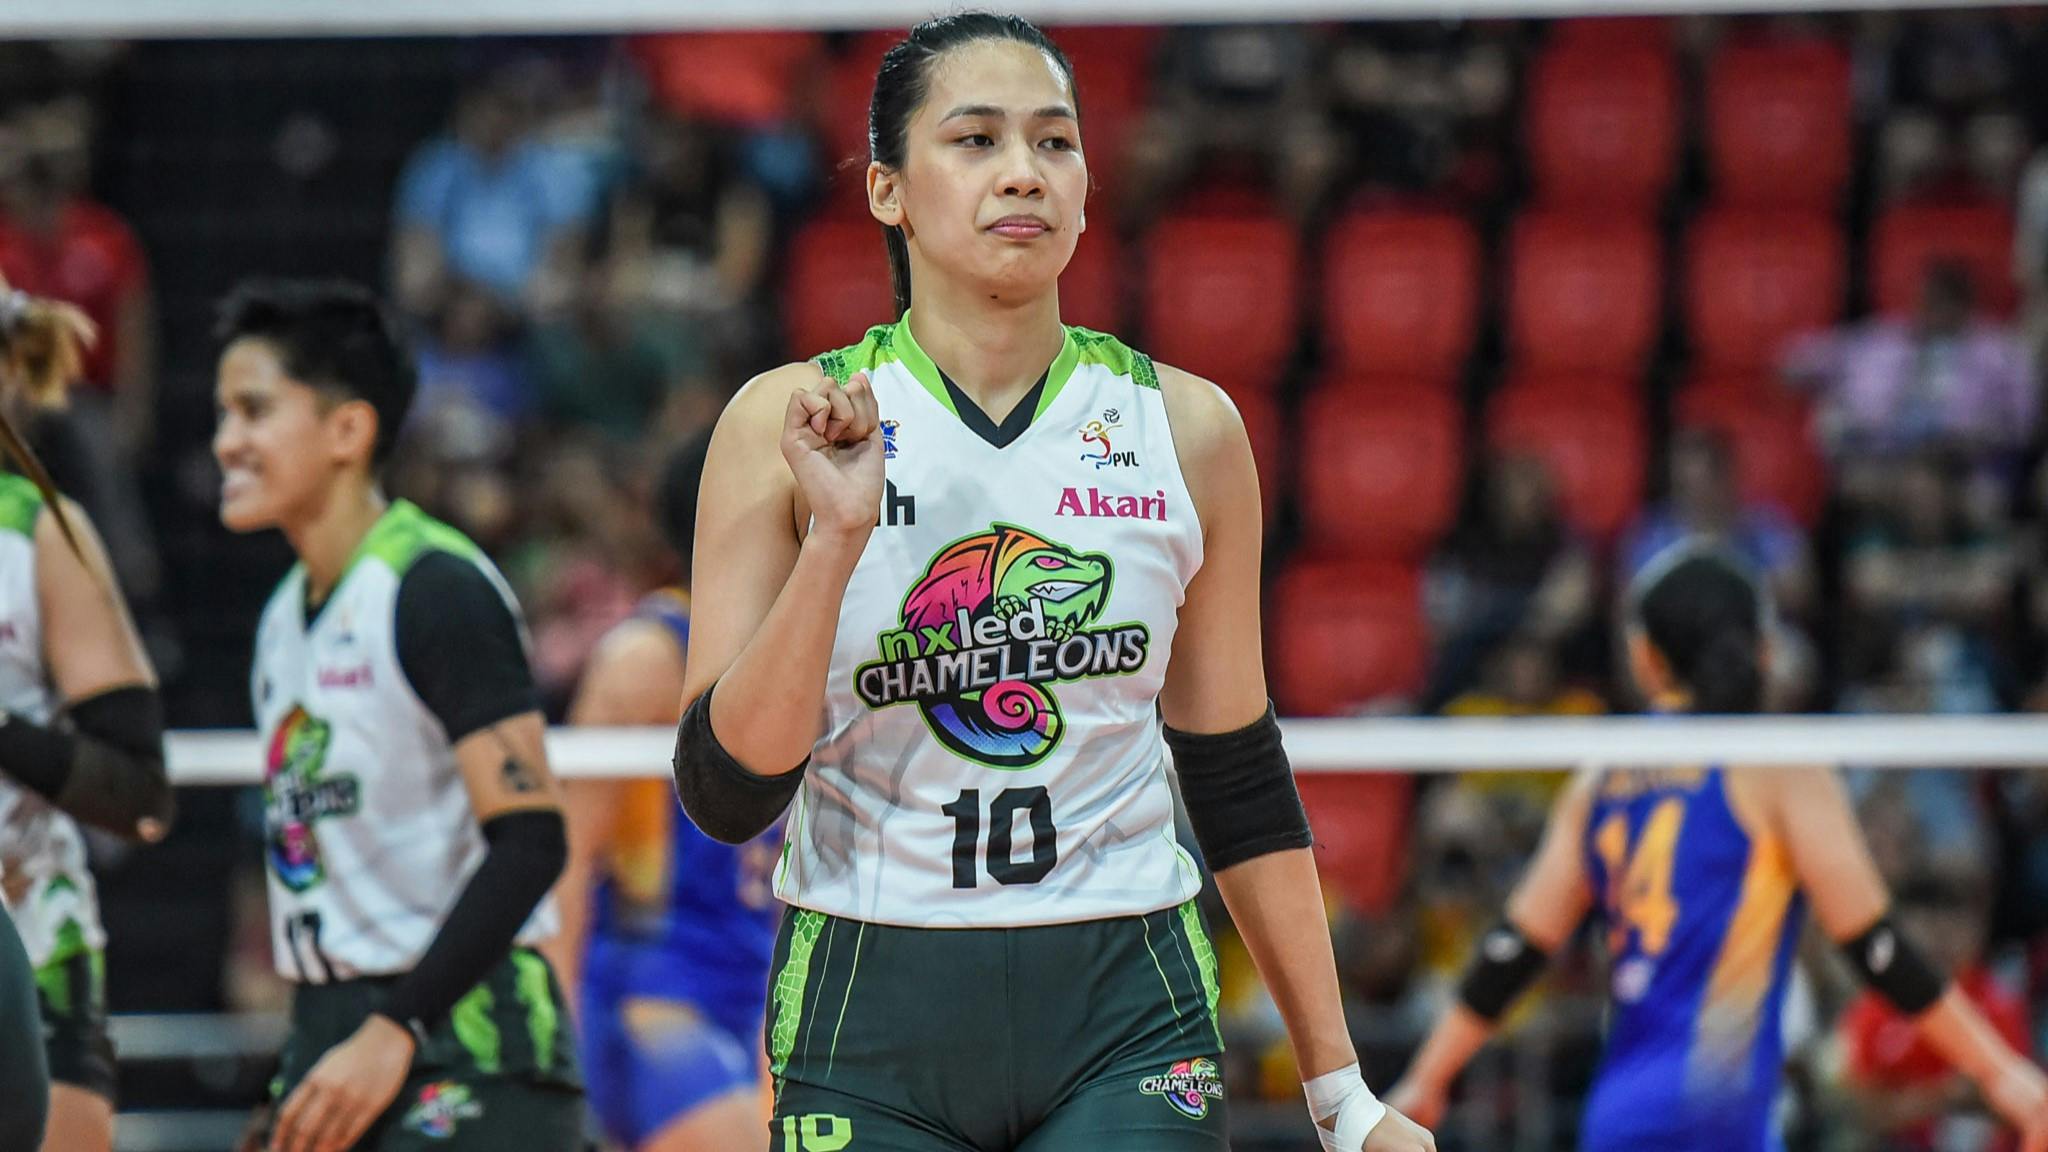 PVL: Cams Victoria steps up in lieu of Lycha Ebon in Nxled’s sweep of Capital1